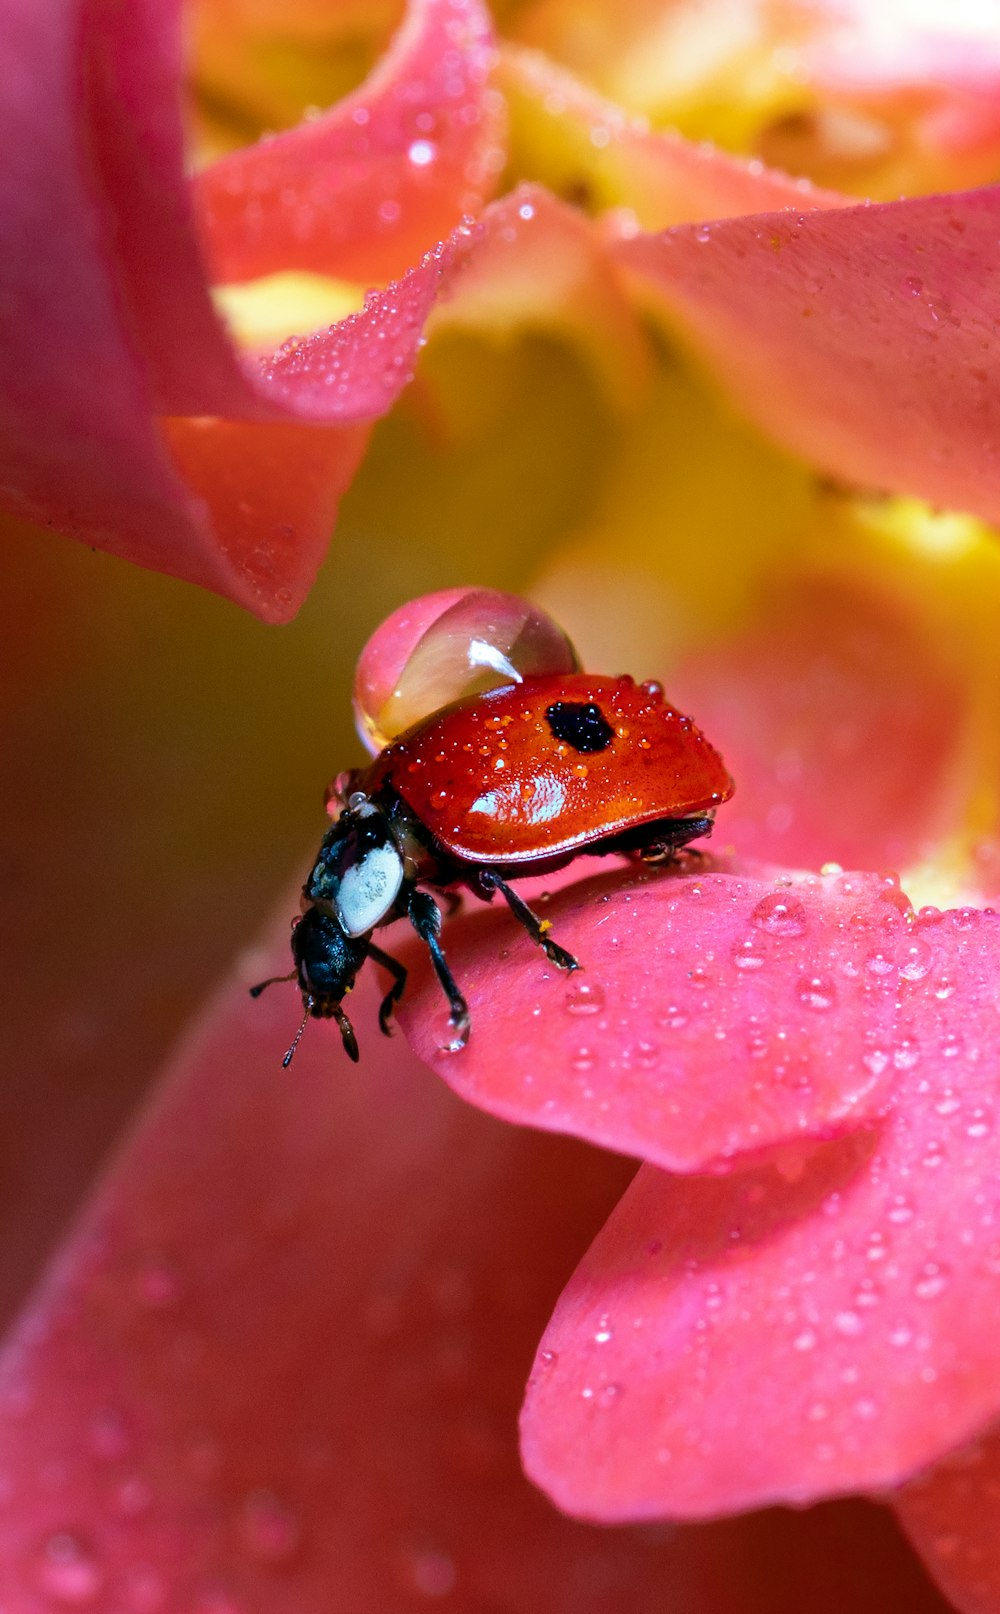 red ladybug perched on red flower in close up photography during daytime